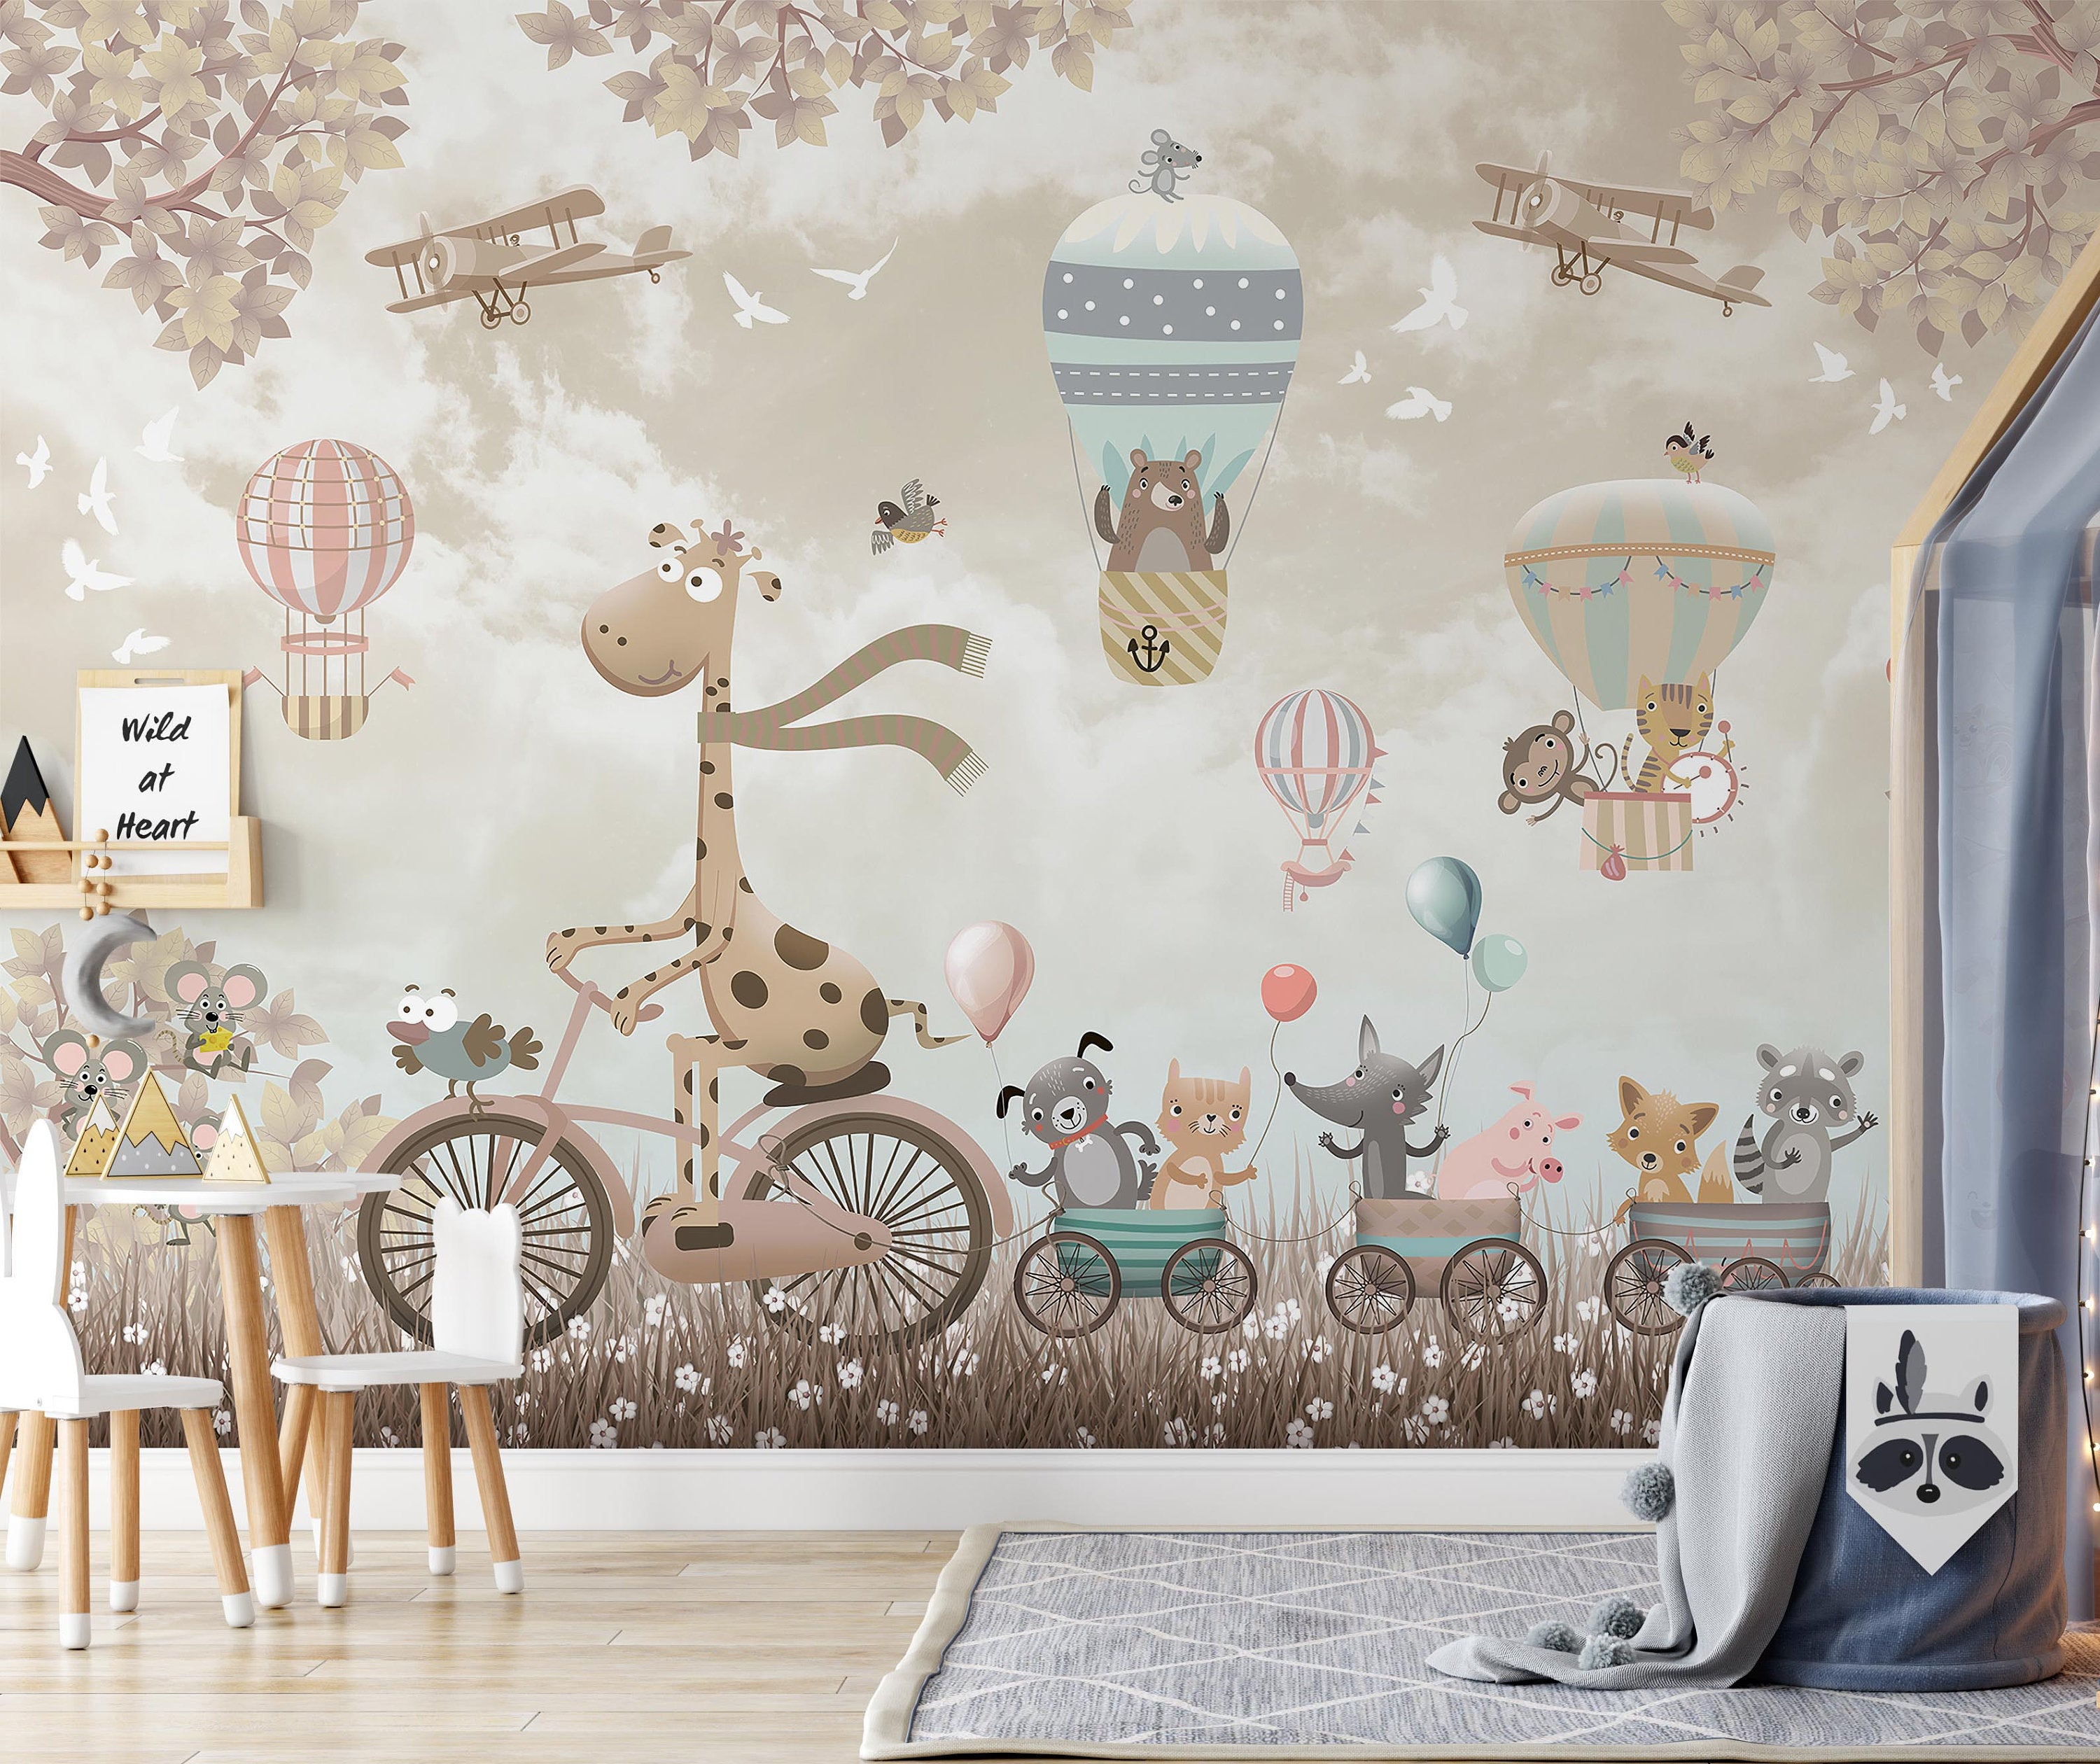 Big Giraffe on Bicycle with Cute Baby Animals Monkey Fox Pig Rabbit Bear Wallpaper Self Adhesive Peel & Stick Wall Decoration Removable